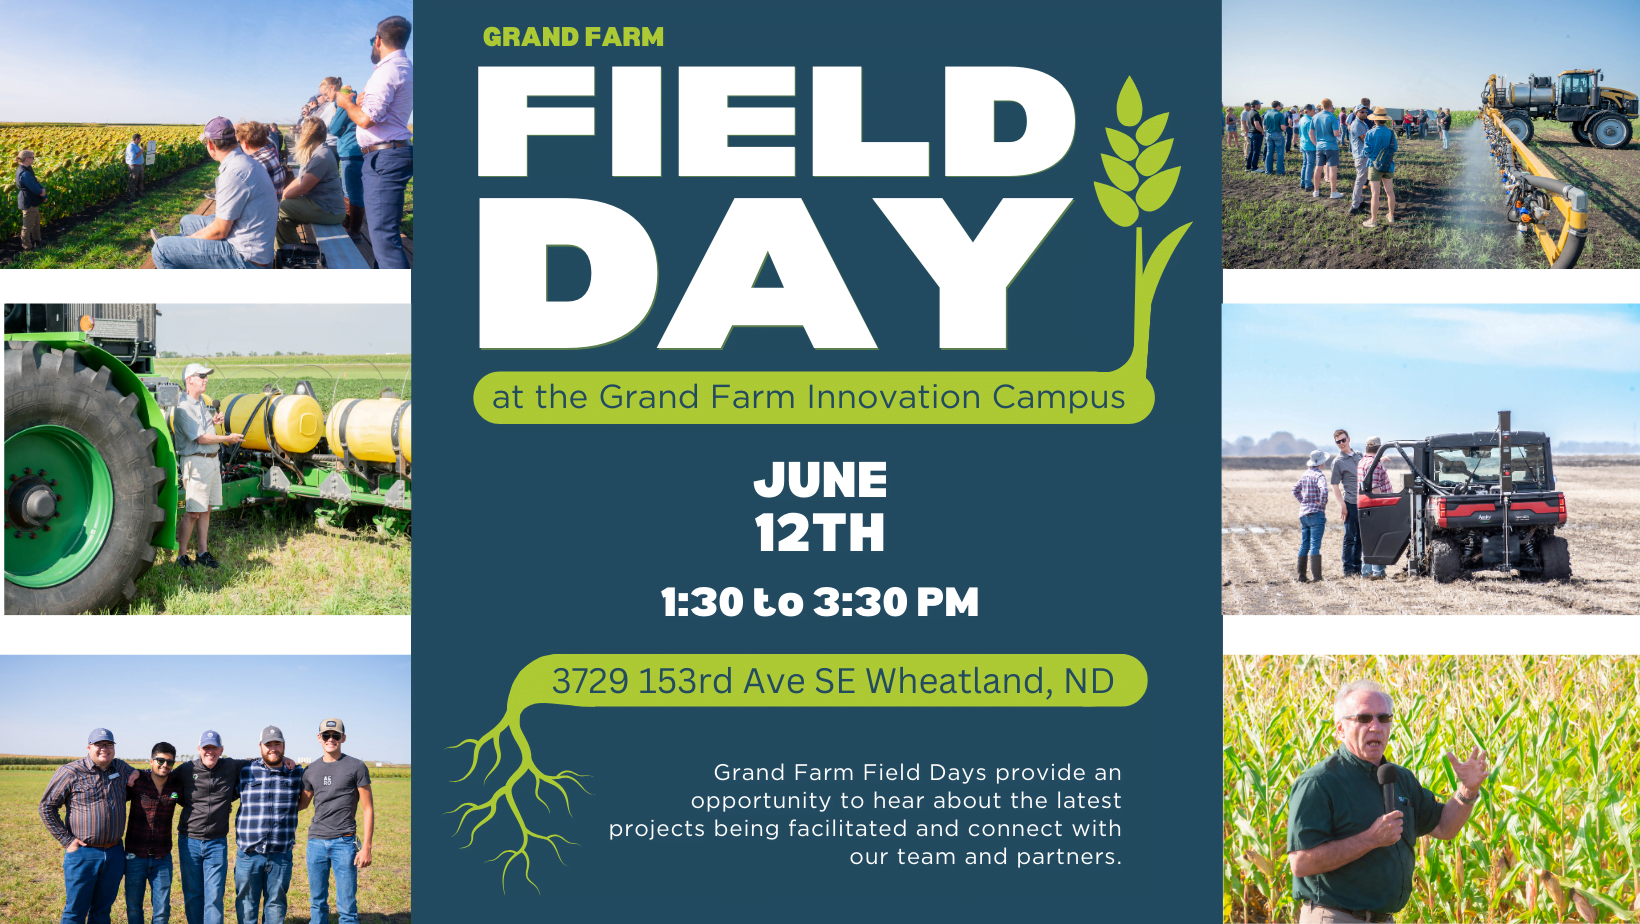 Field Day at the Grand Farm Innovation Campus on June 12th.